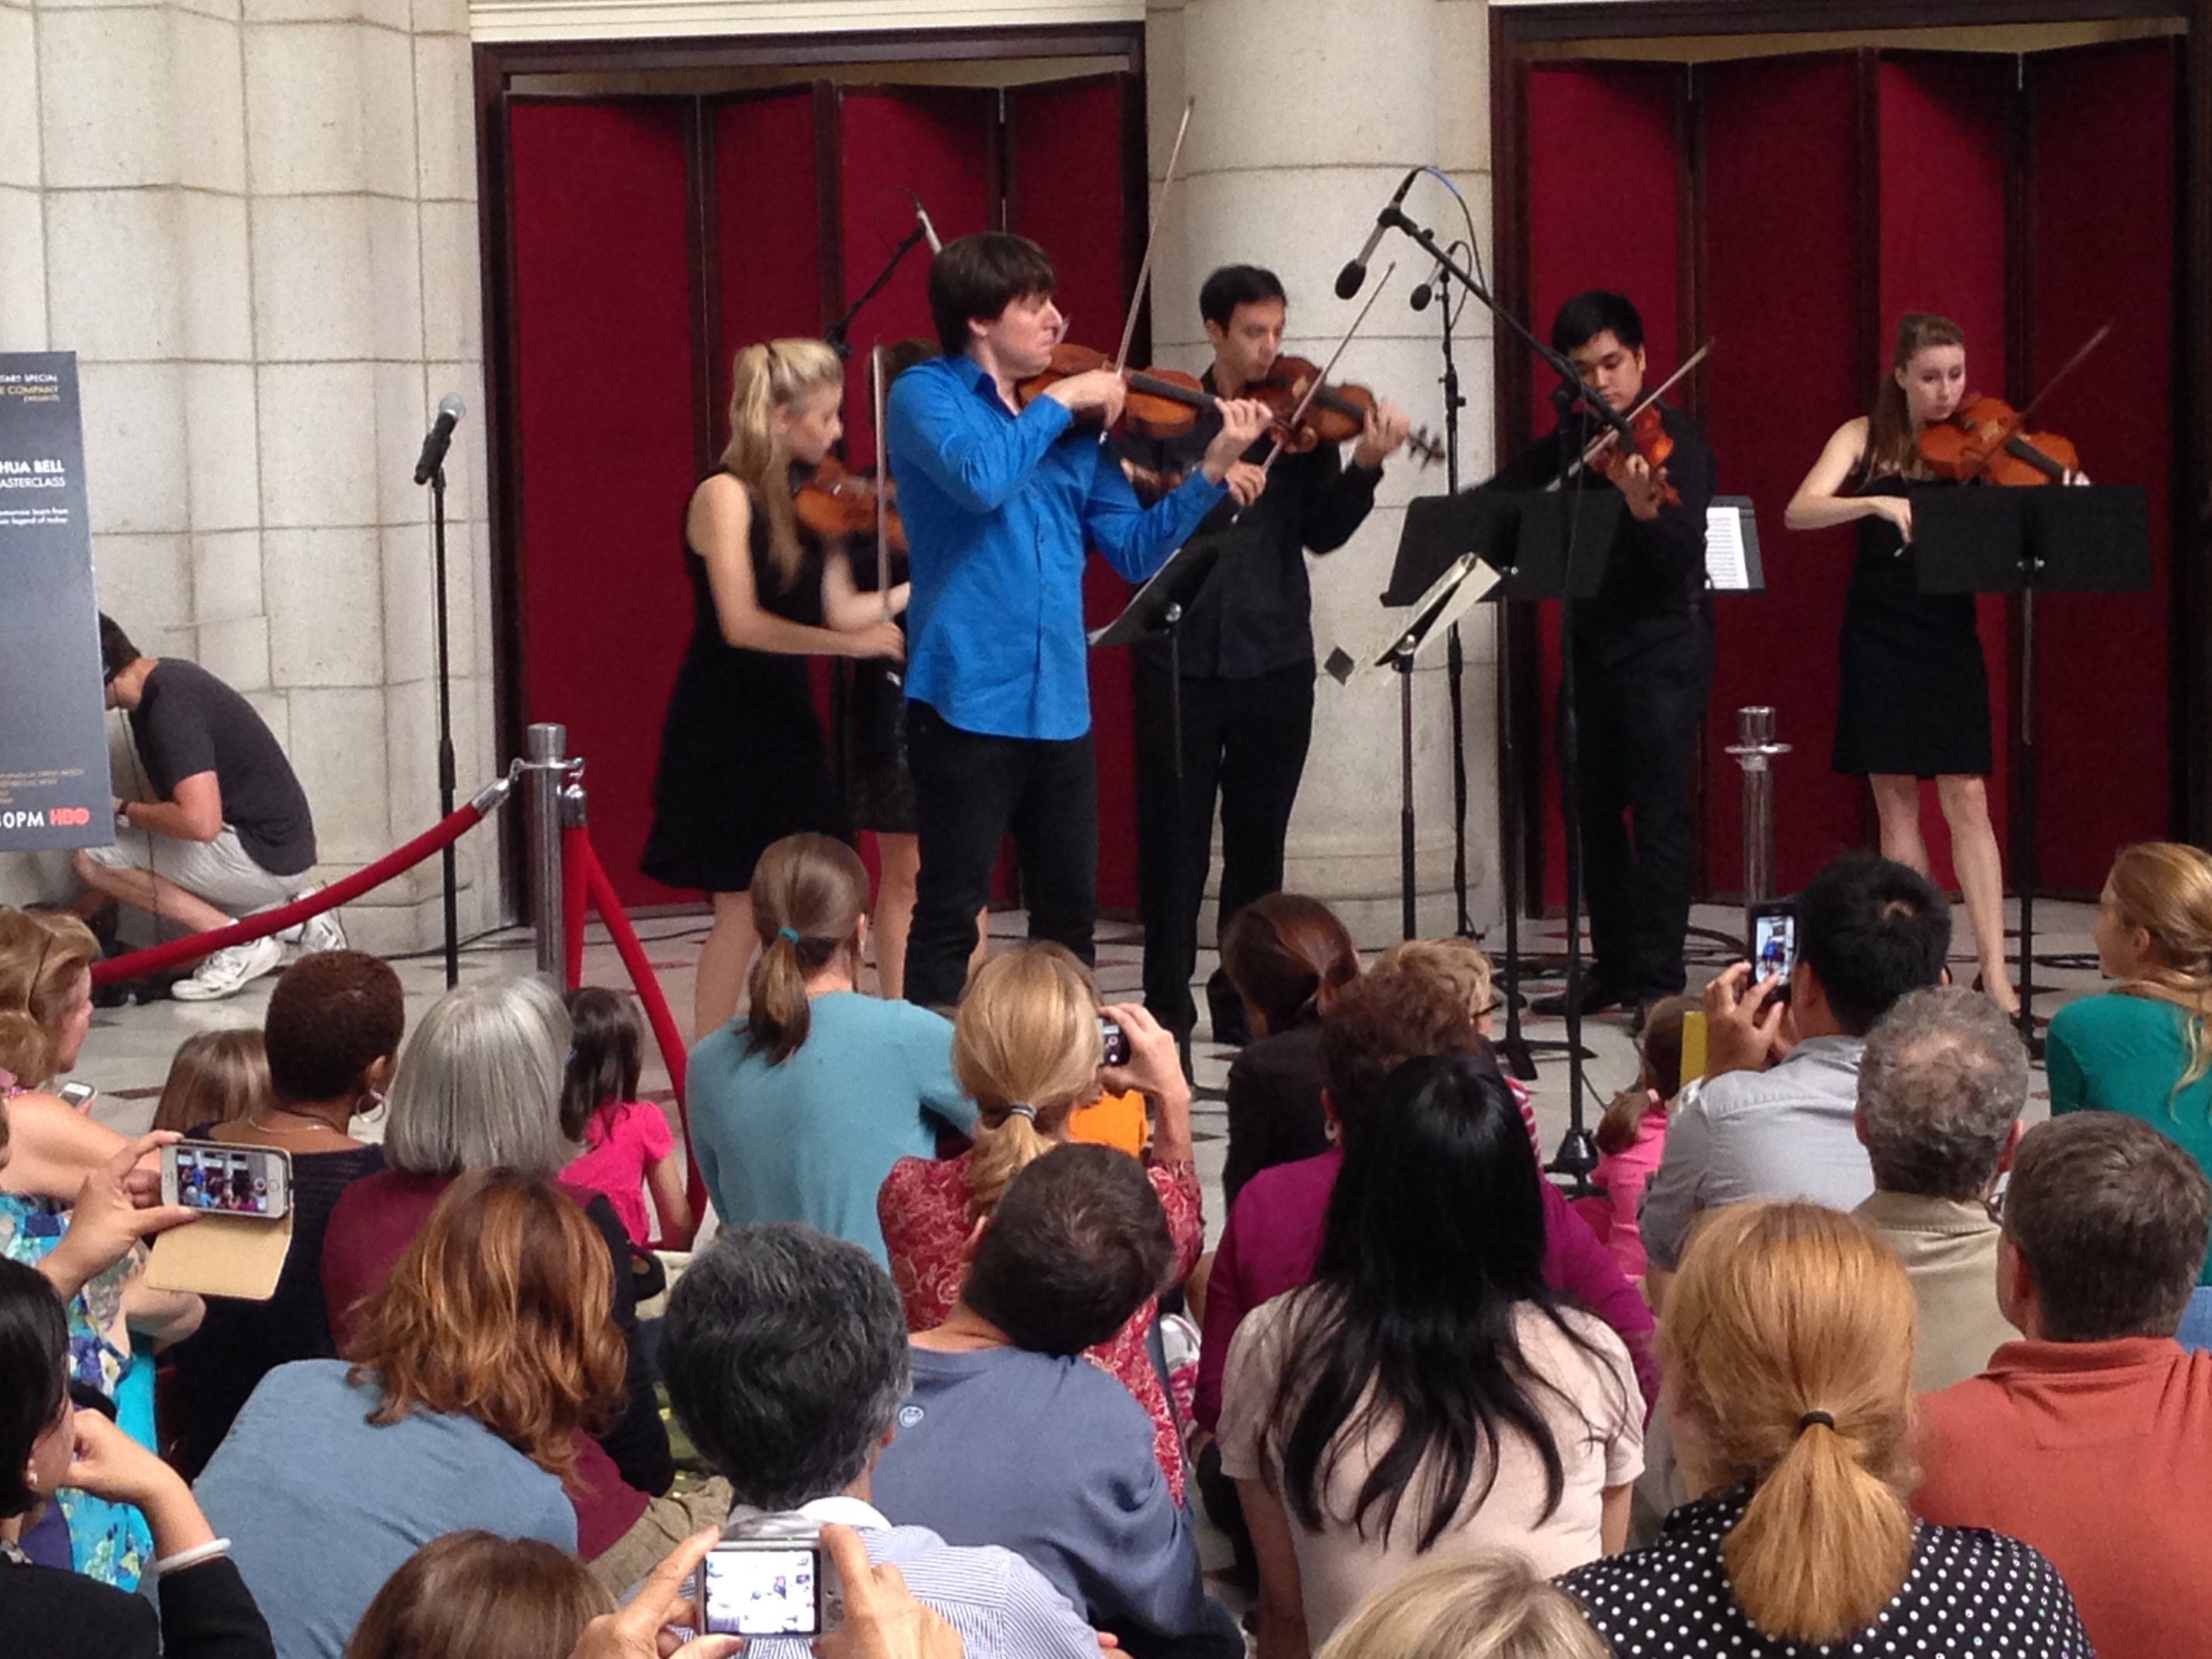 Joshua Bell performs in Union Station in Washington, D.C. on September 30, 2014.